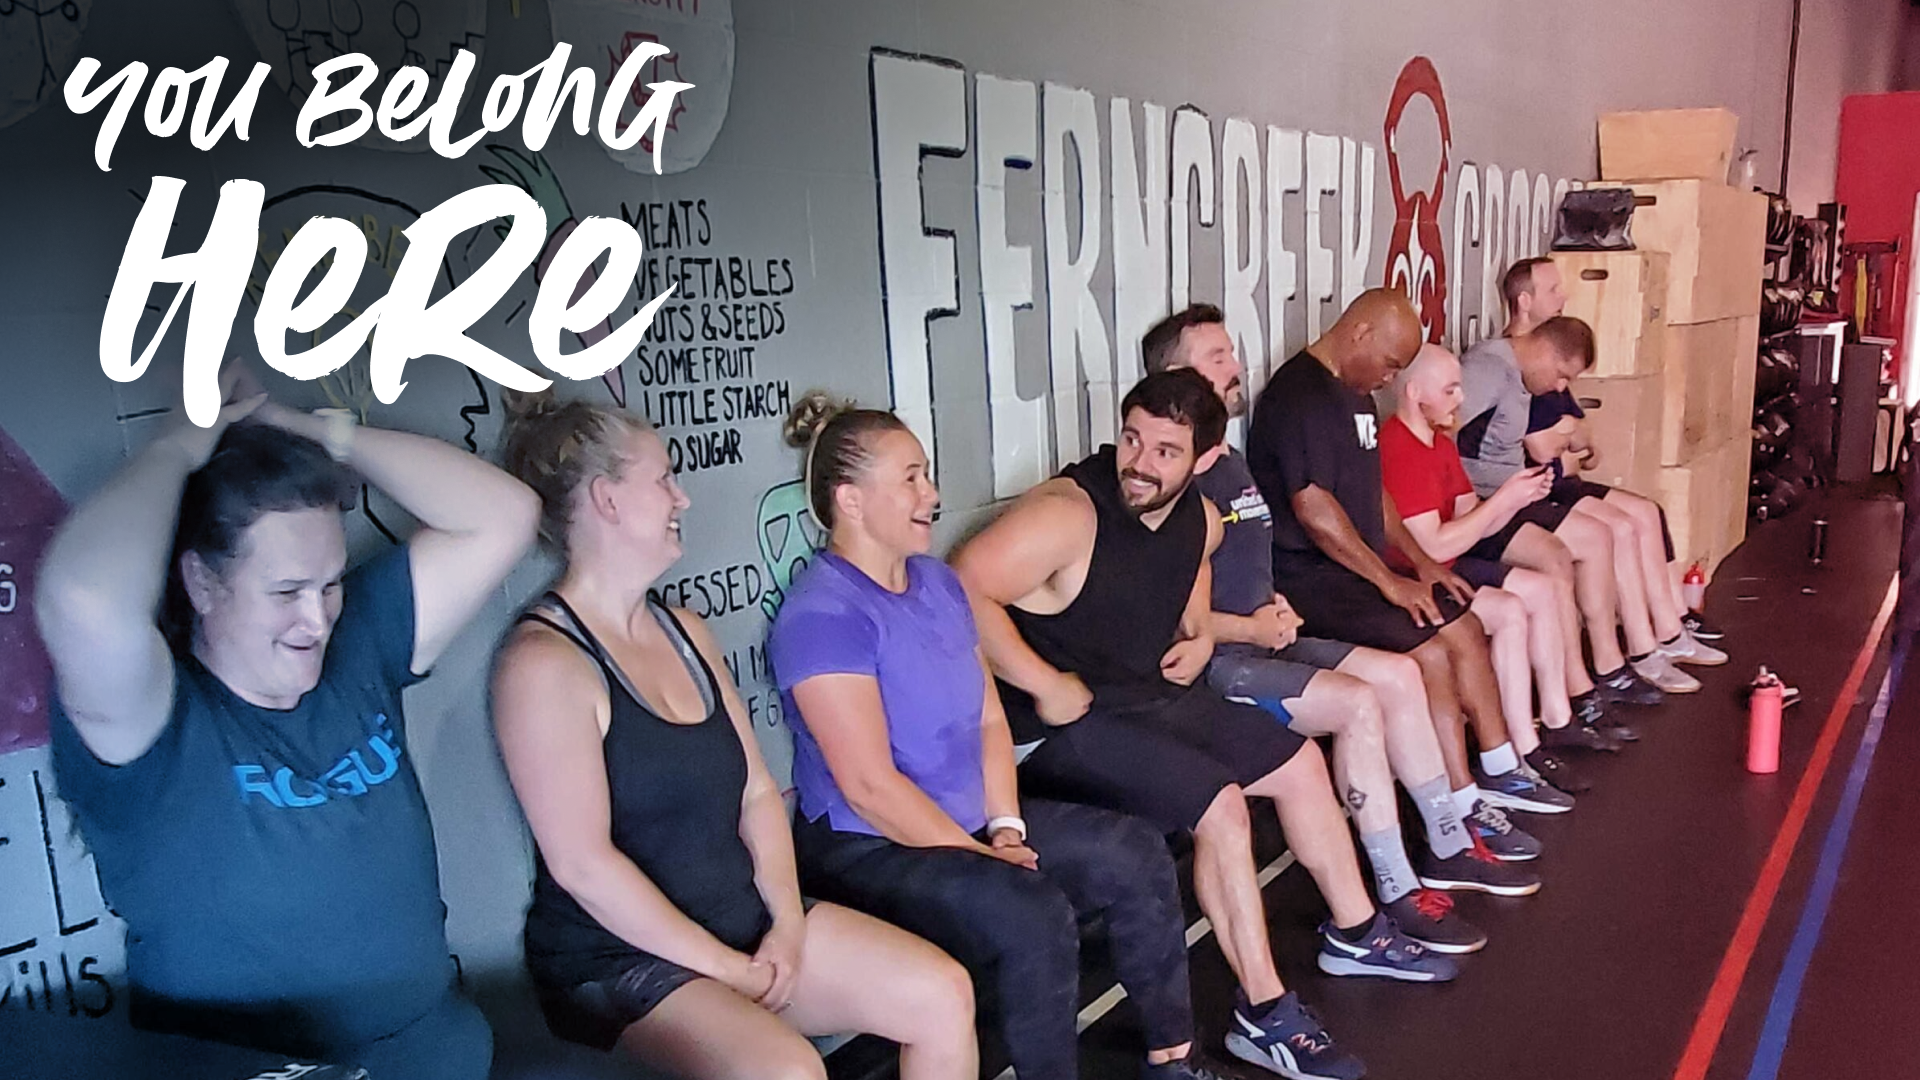 Rewrite your story at Fern Creek CrossFit